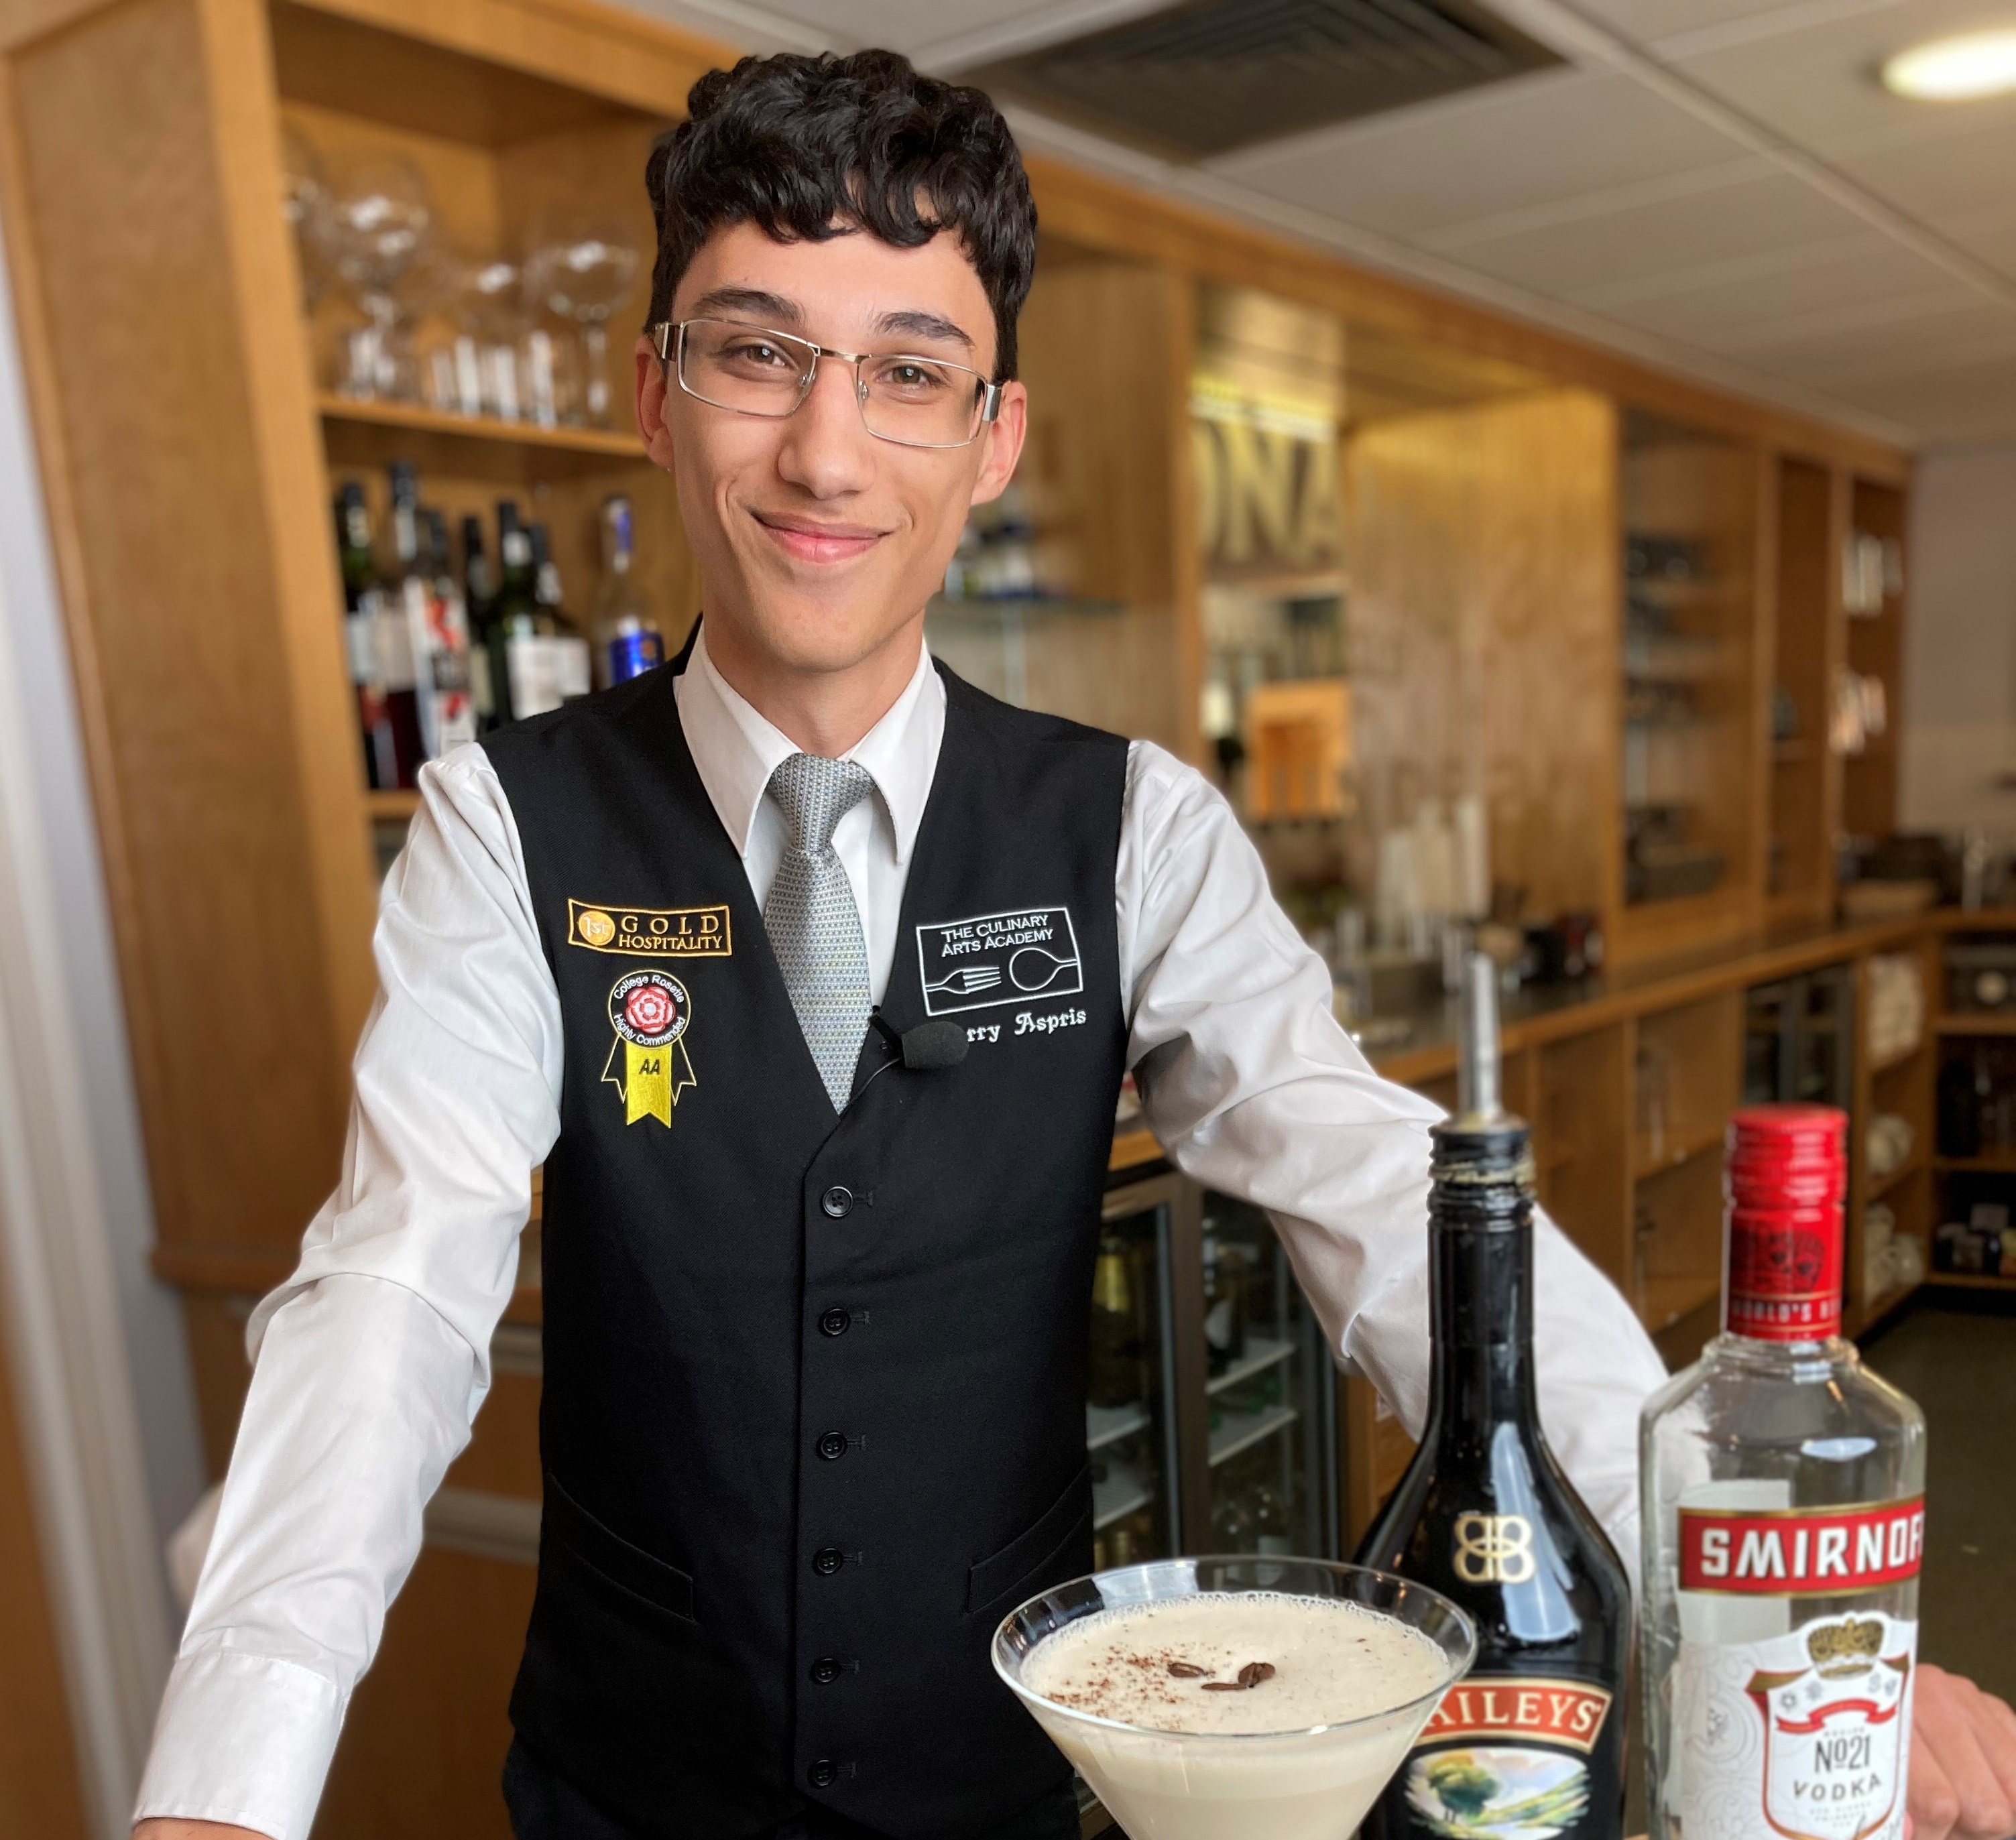 Culinary Arts Academy student barman smiling at camera with cocktails and mocktails in foreground